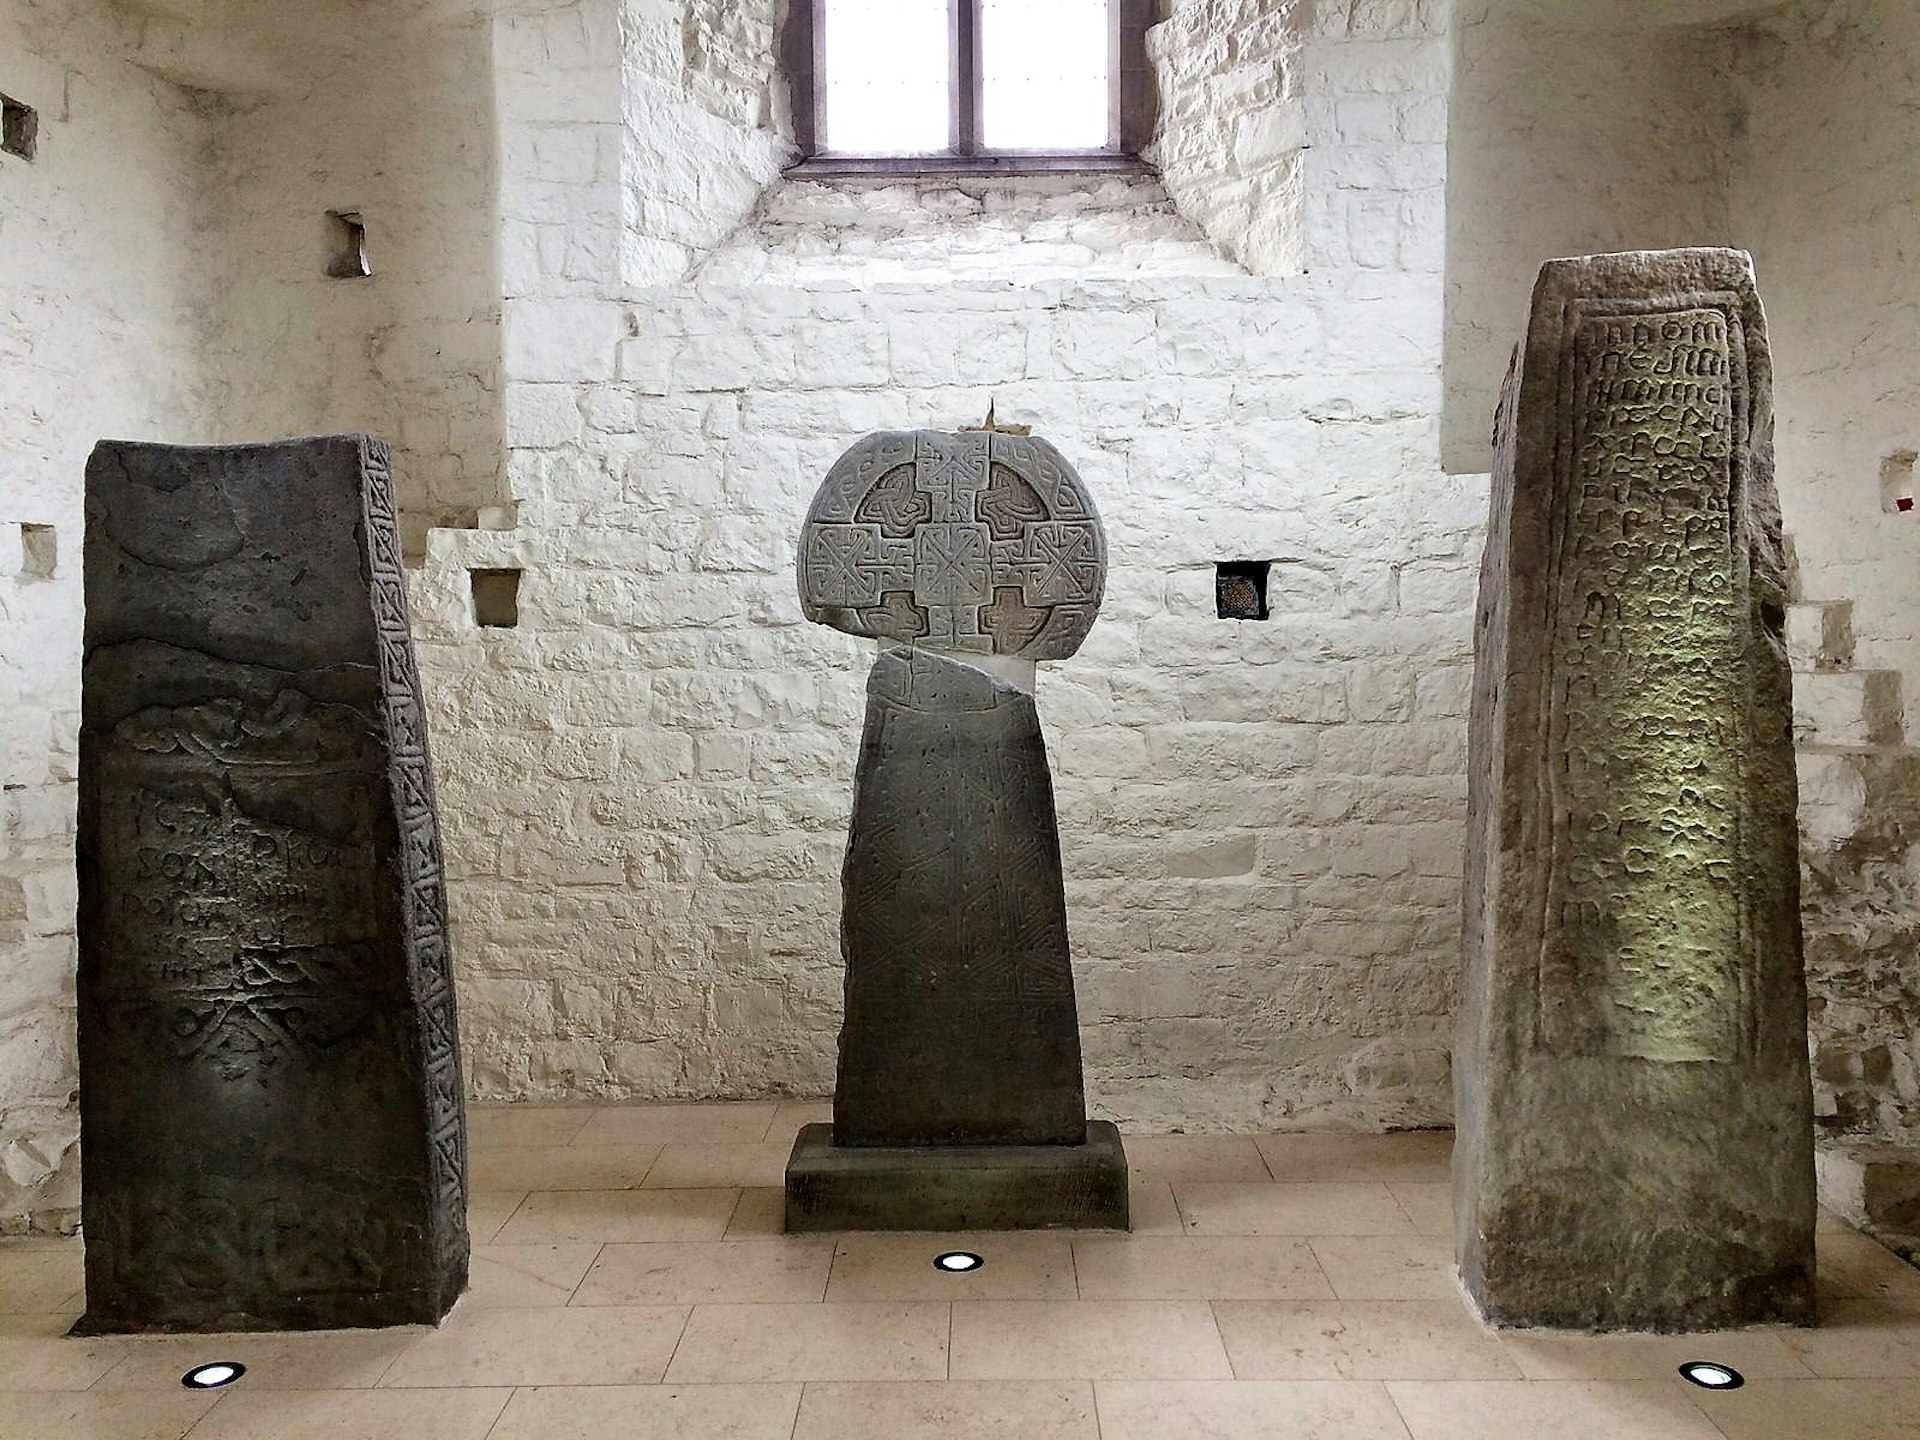 Cardiff day trip -Three crosses in a corner of a church in Llantwit Major, a town on the Bristol Channel Coast, Wales